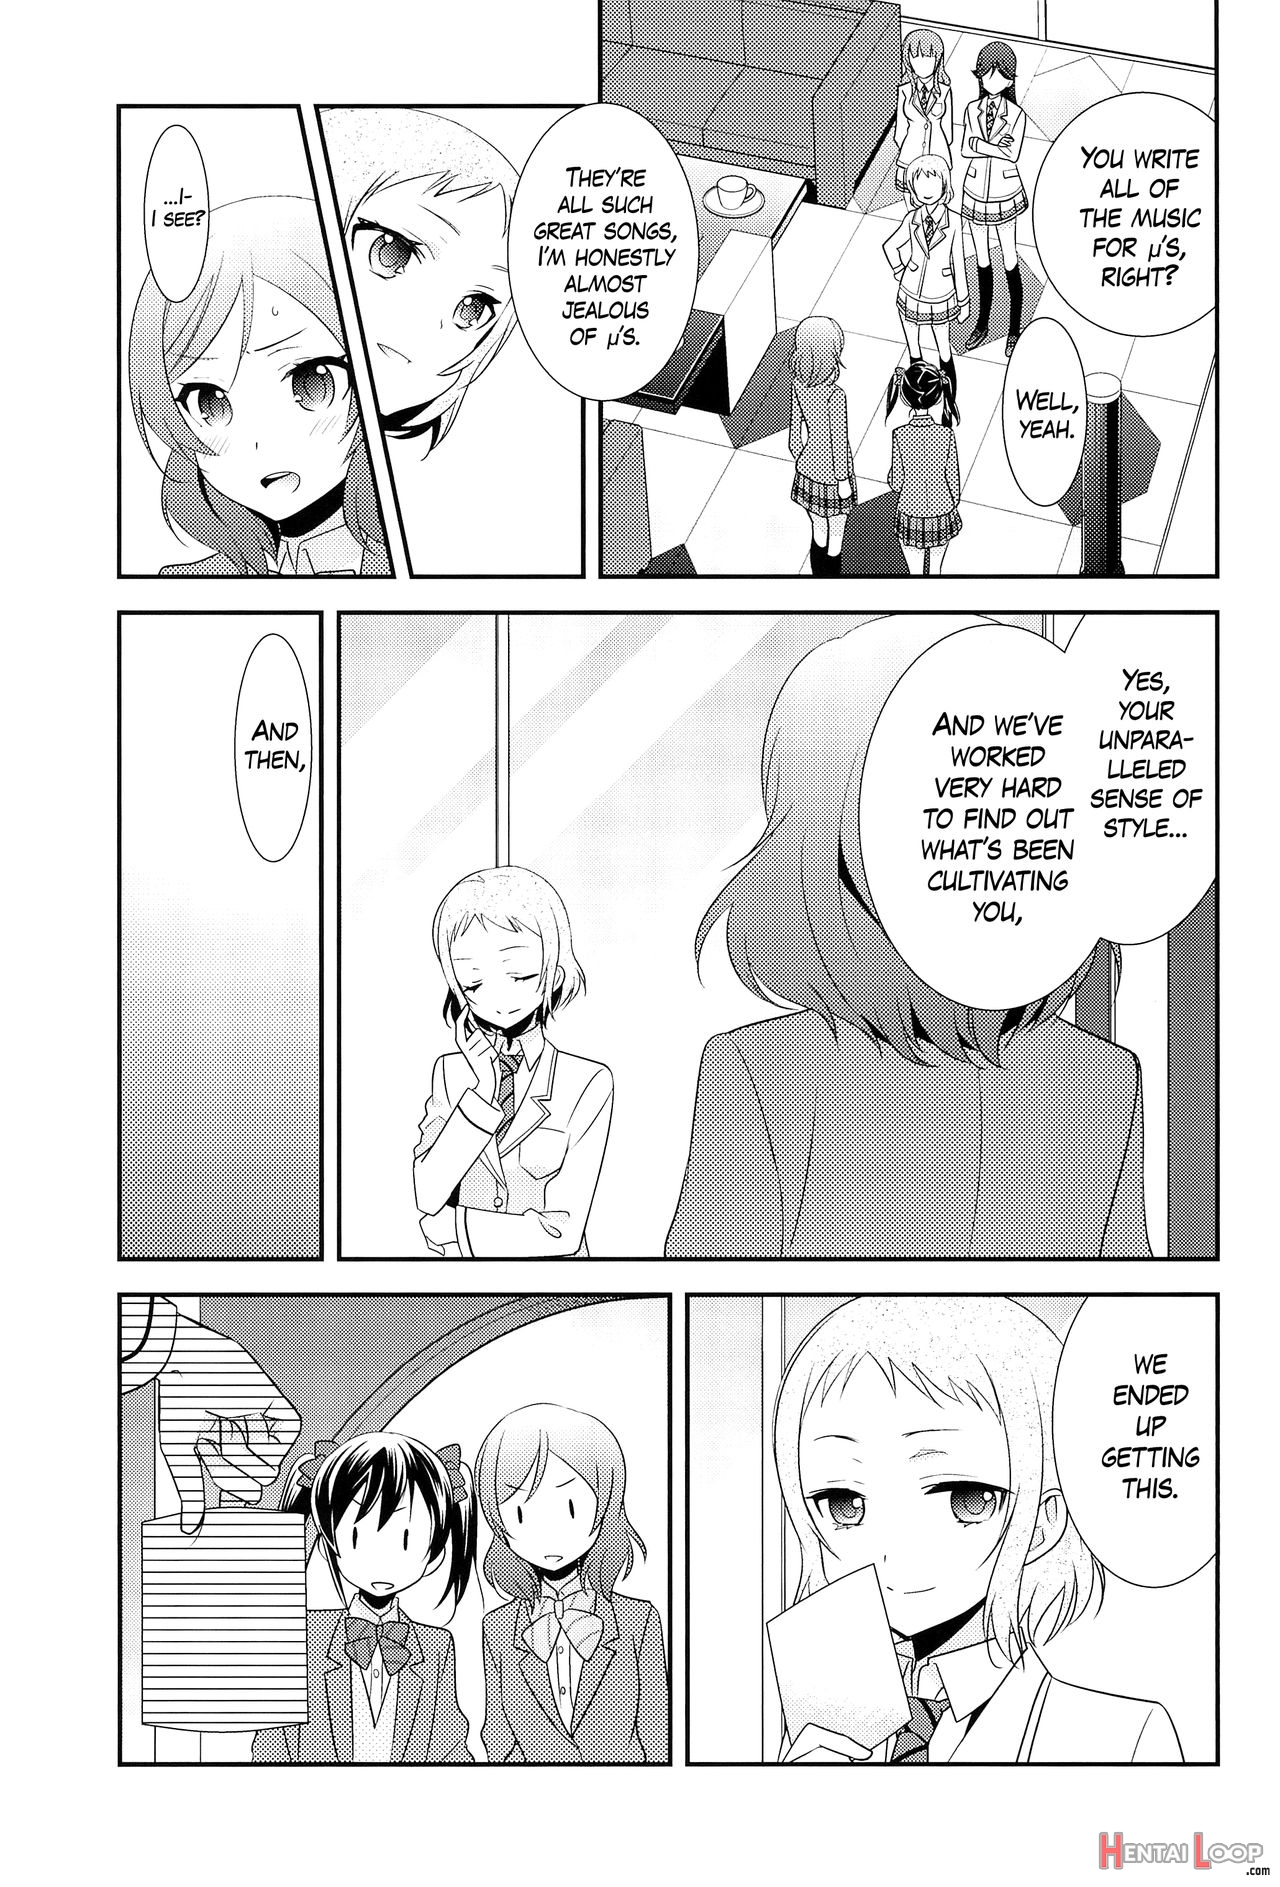 Nicomaki Viewing Party page 7